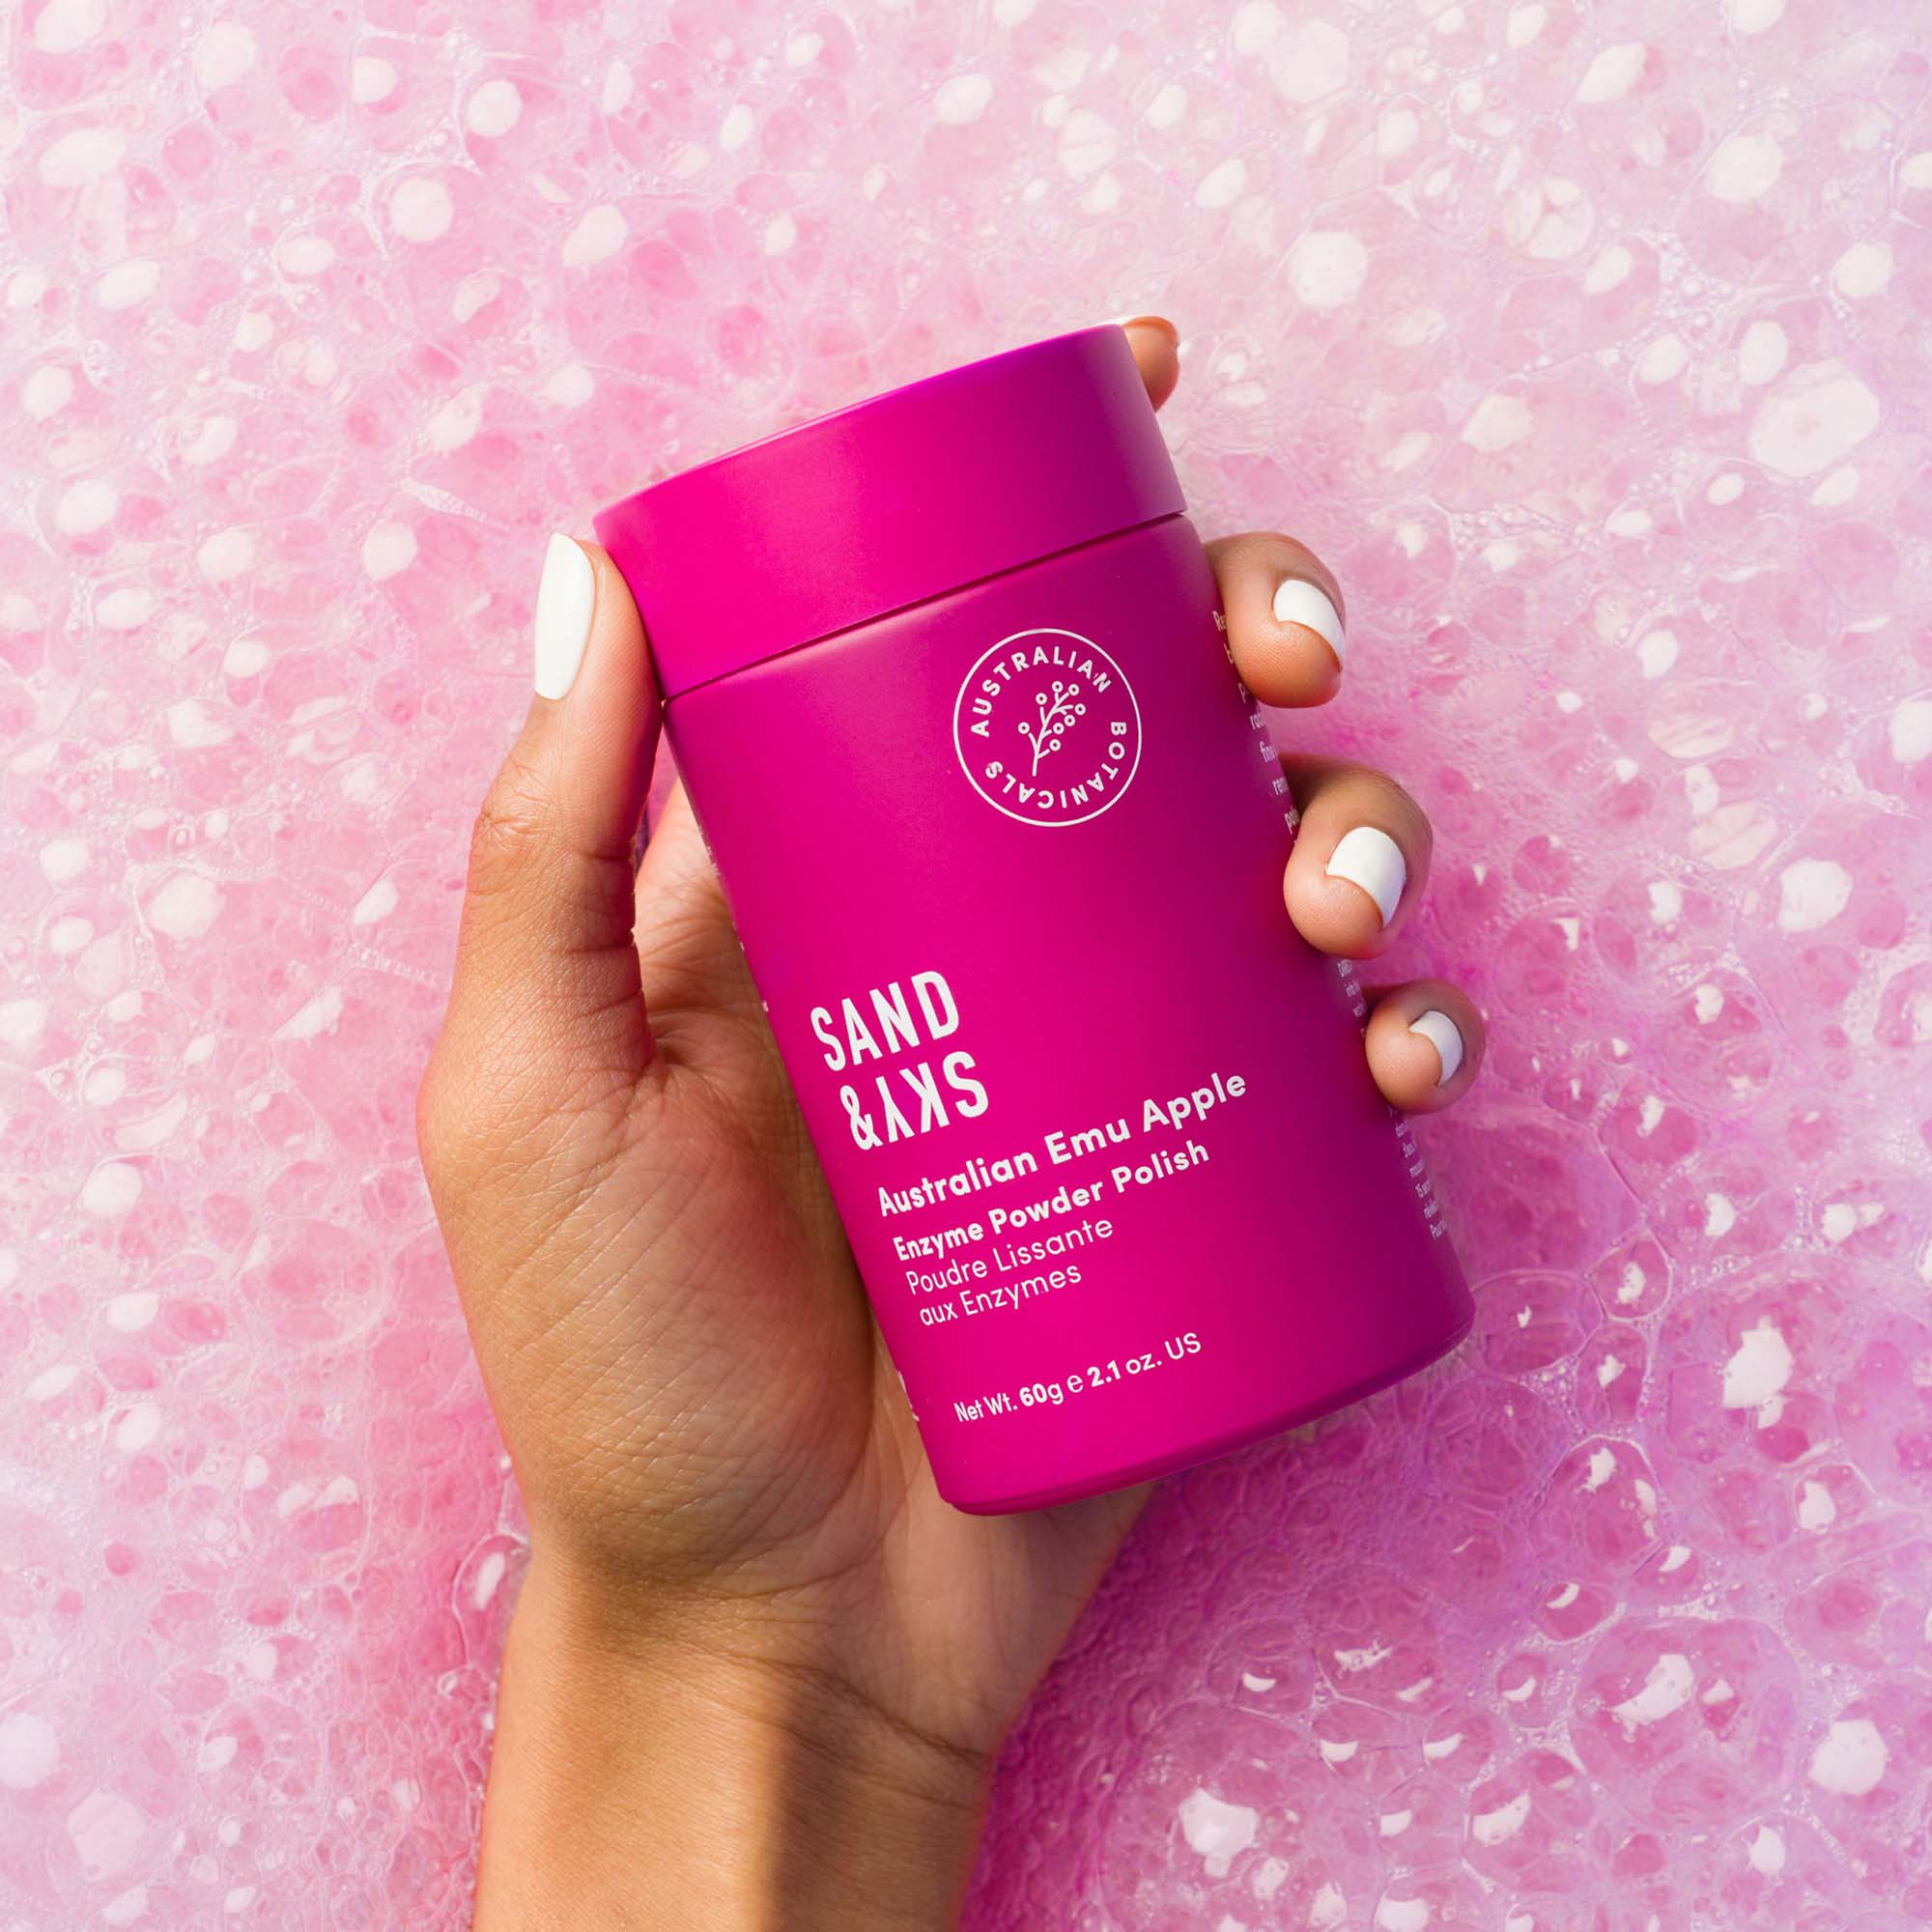 Sand & Sky - Calling all the glow-lovers out there! Want that instant glow?  📢 Use Enzyme Powder Polish 2-3 times a week to reveal your inner radiance.  Want to glow even